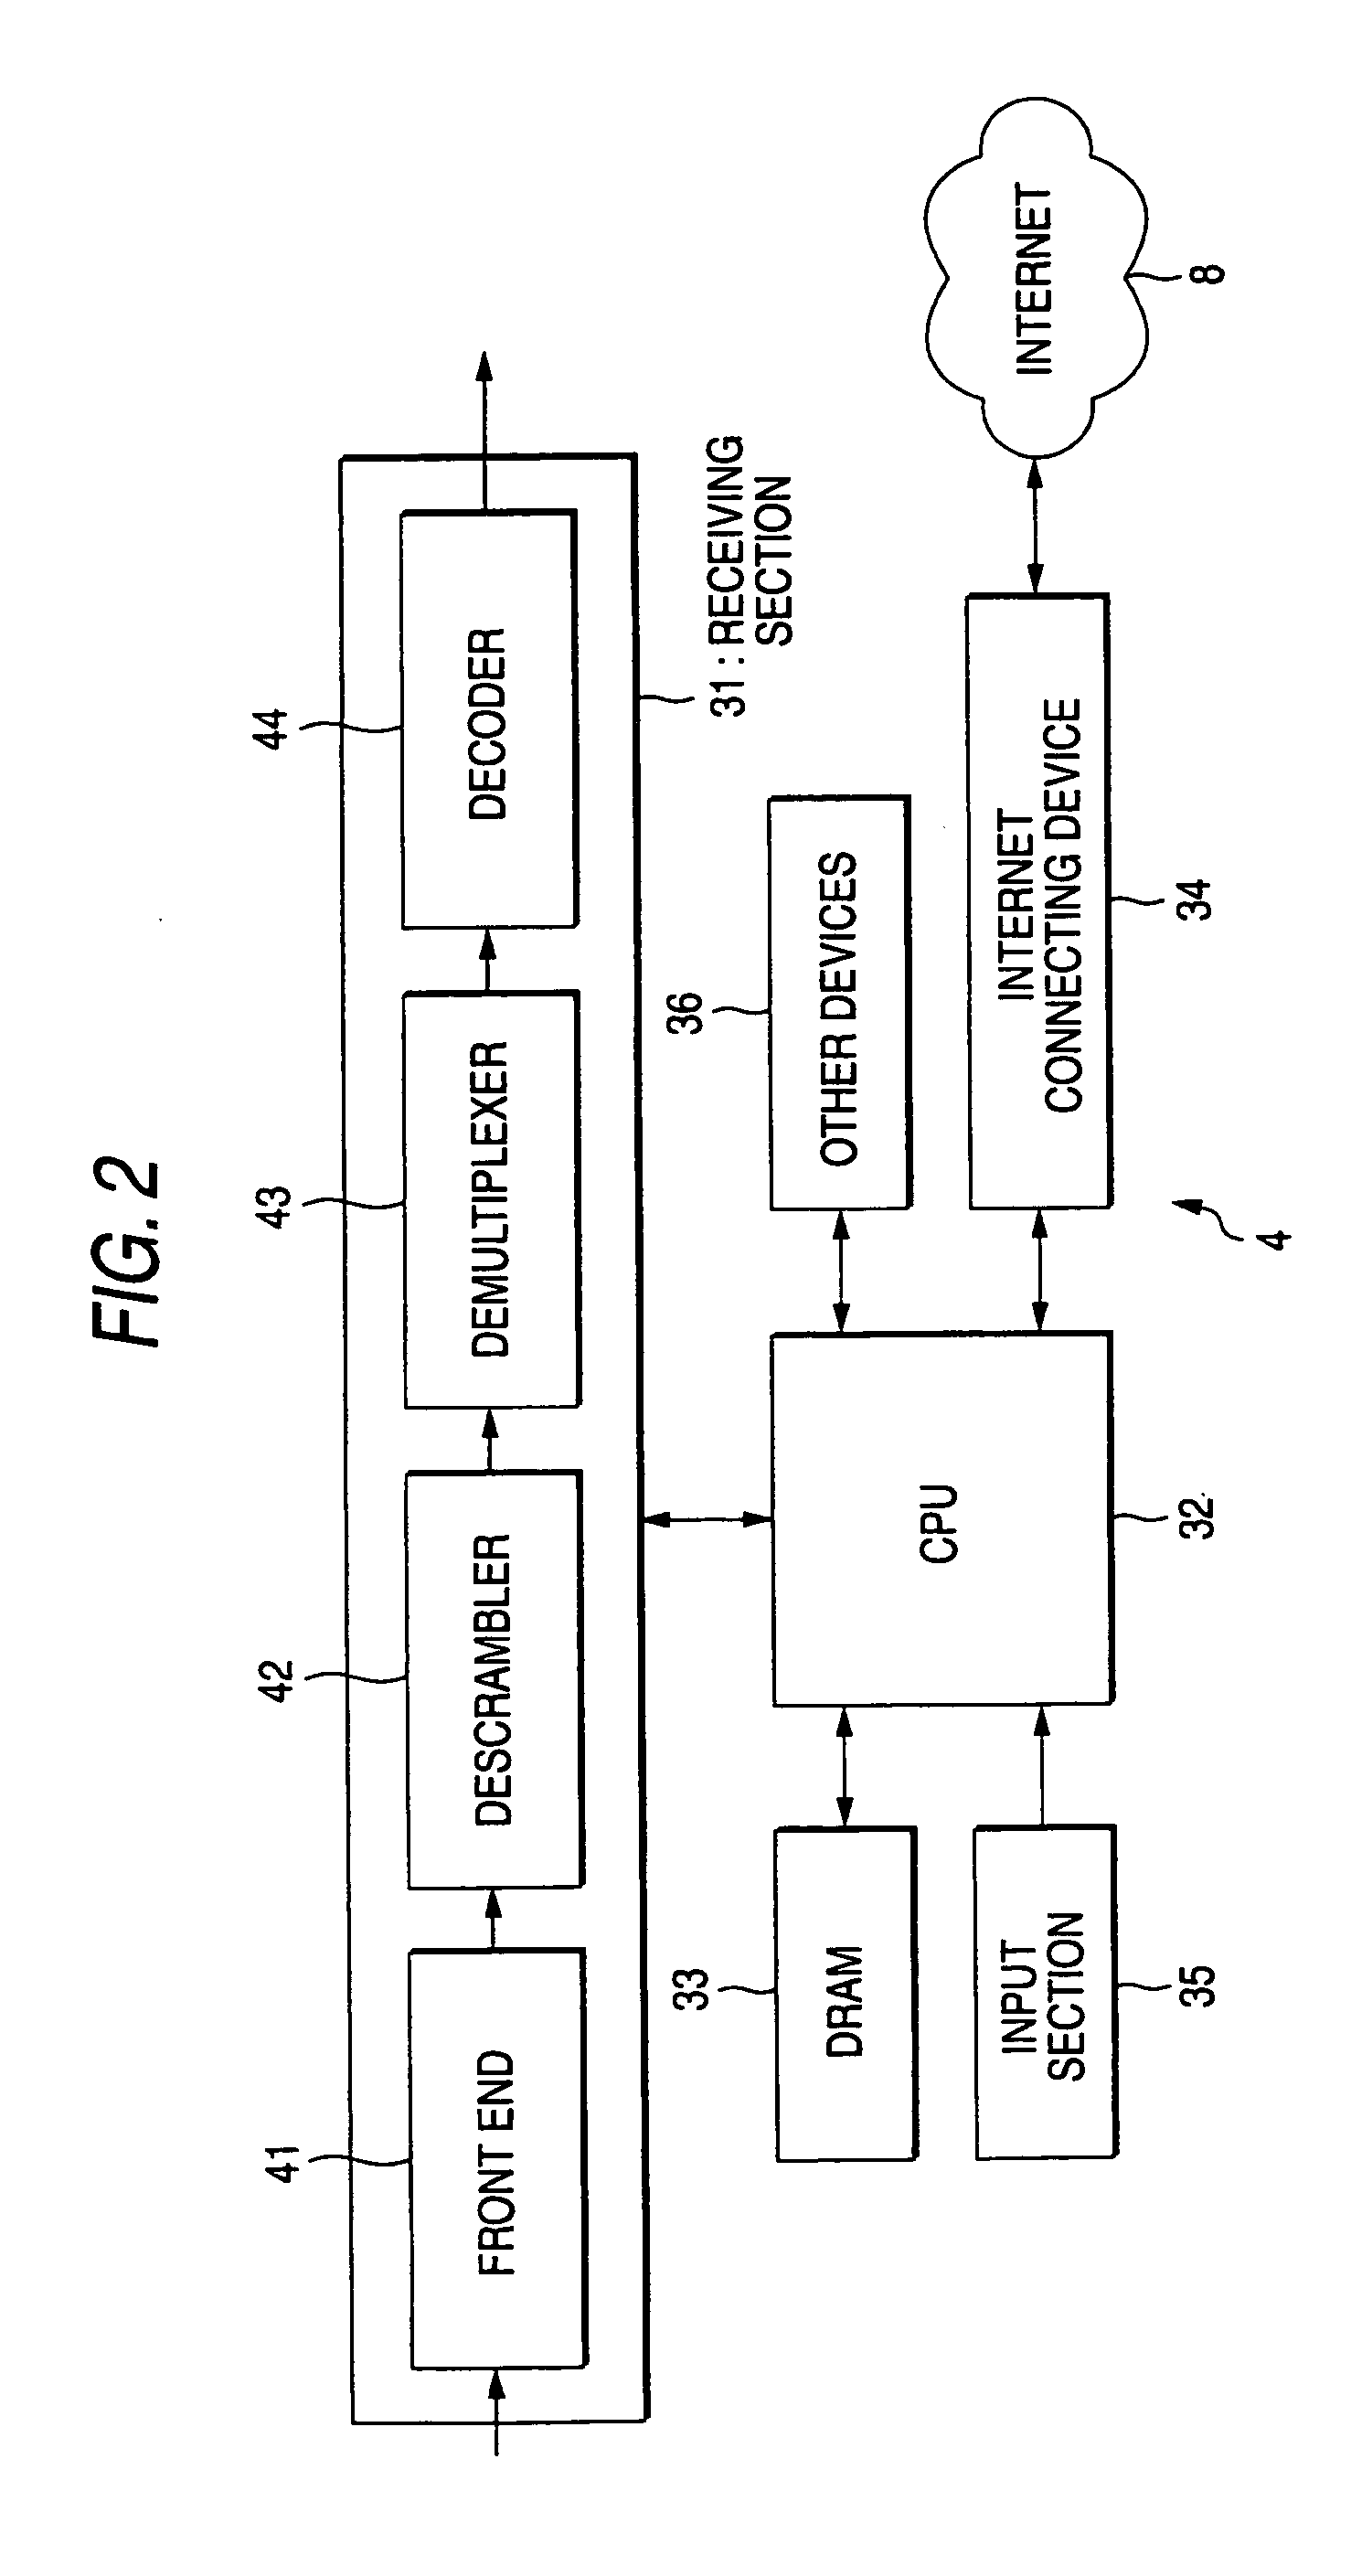 Information providing system, information processing apparatus and method, and information providing apparatus and method